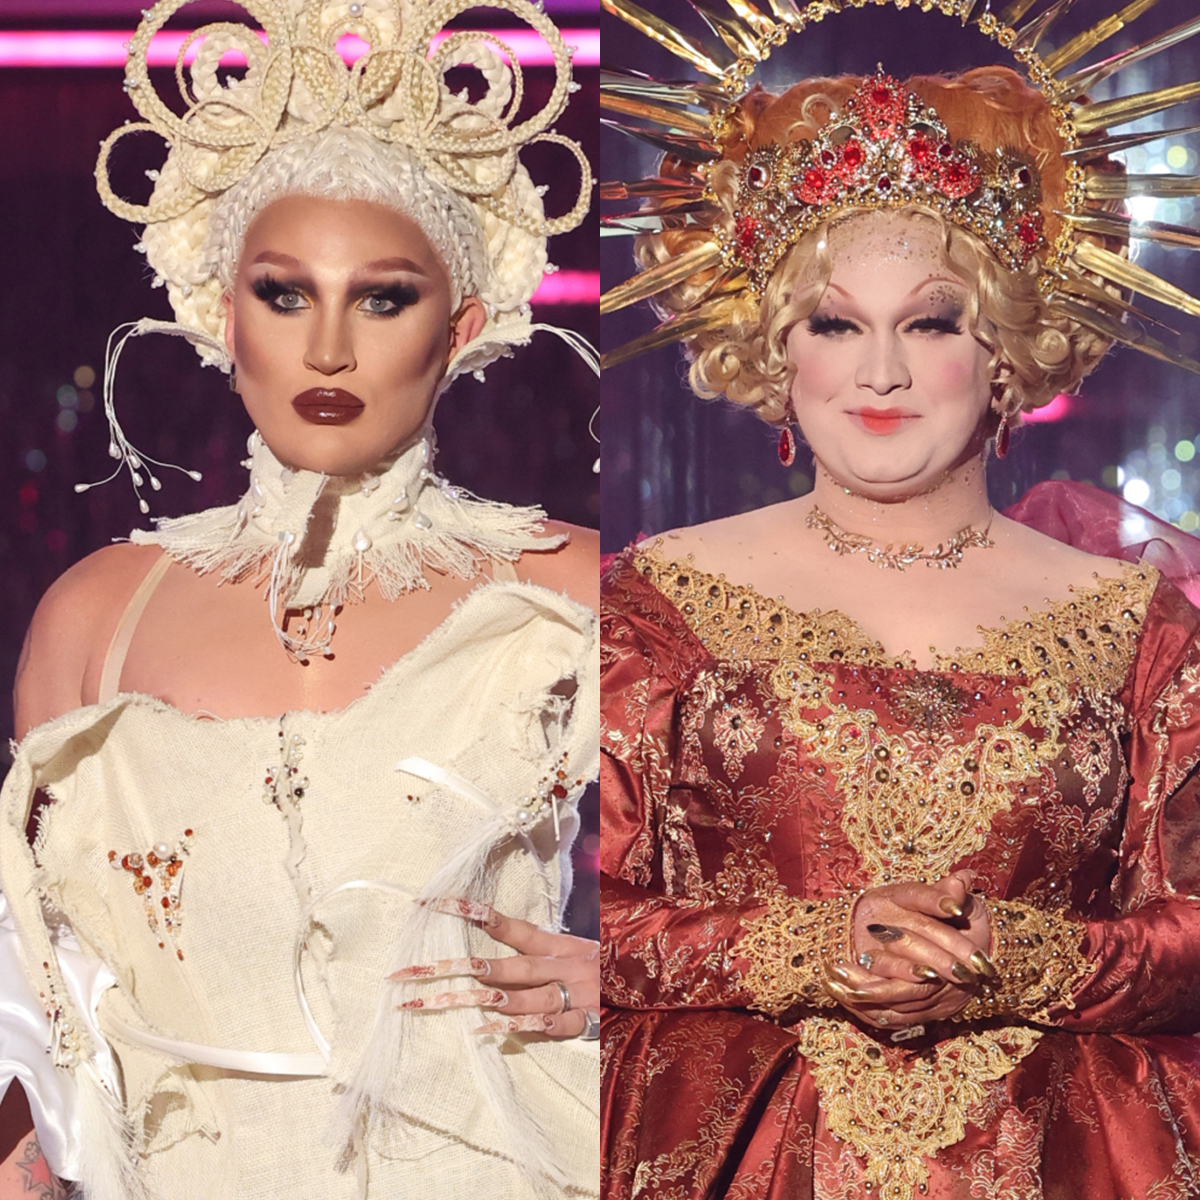 Jinkx Monsoon and The Vivienne Form a Rivalry in This RuPaul's Drag Race All Stars Sneak Peek